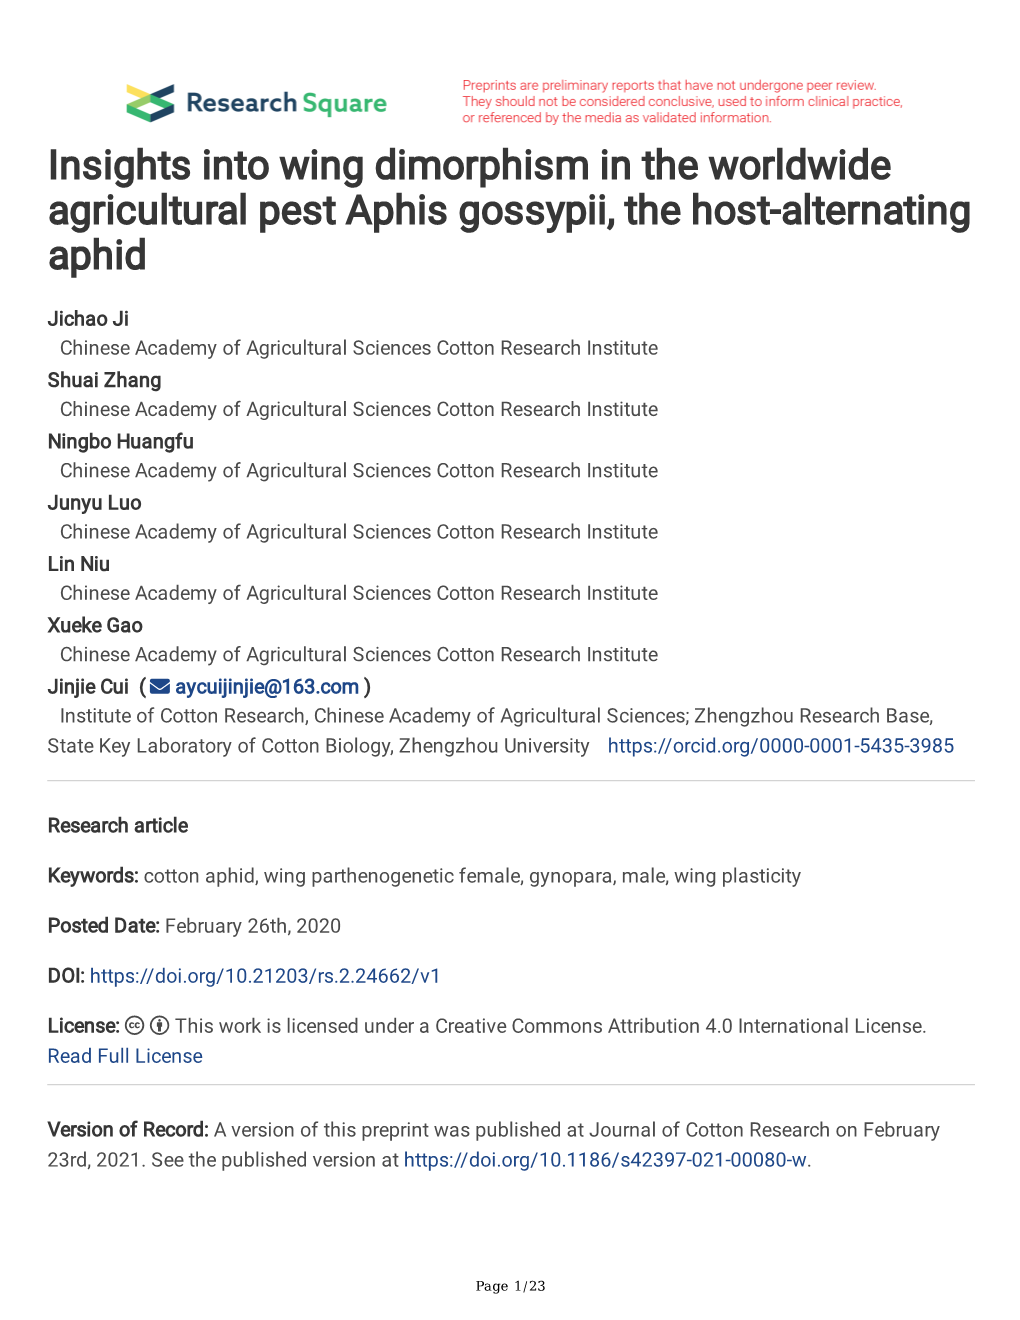 Insights Into Wing Dimorphism in the Worldwide Agricultural Pest Aphis Gossypii, the Host-Alternating Aphid